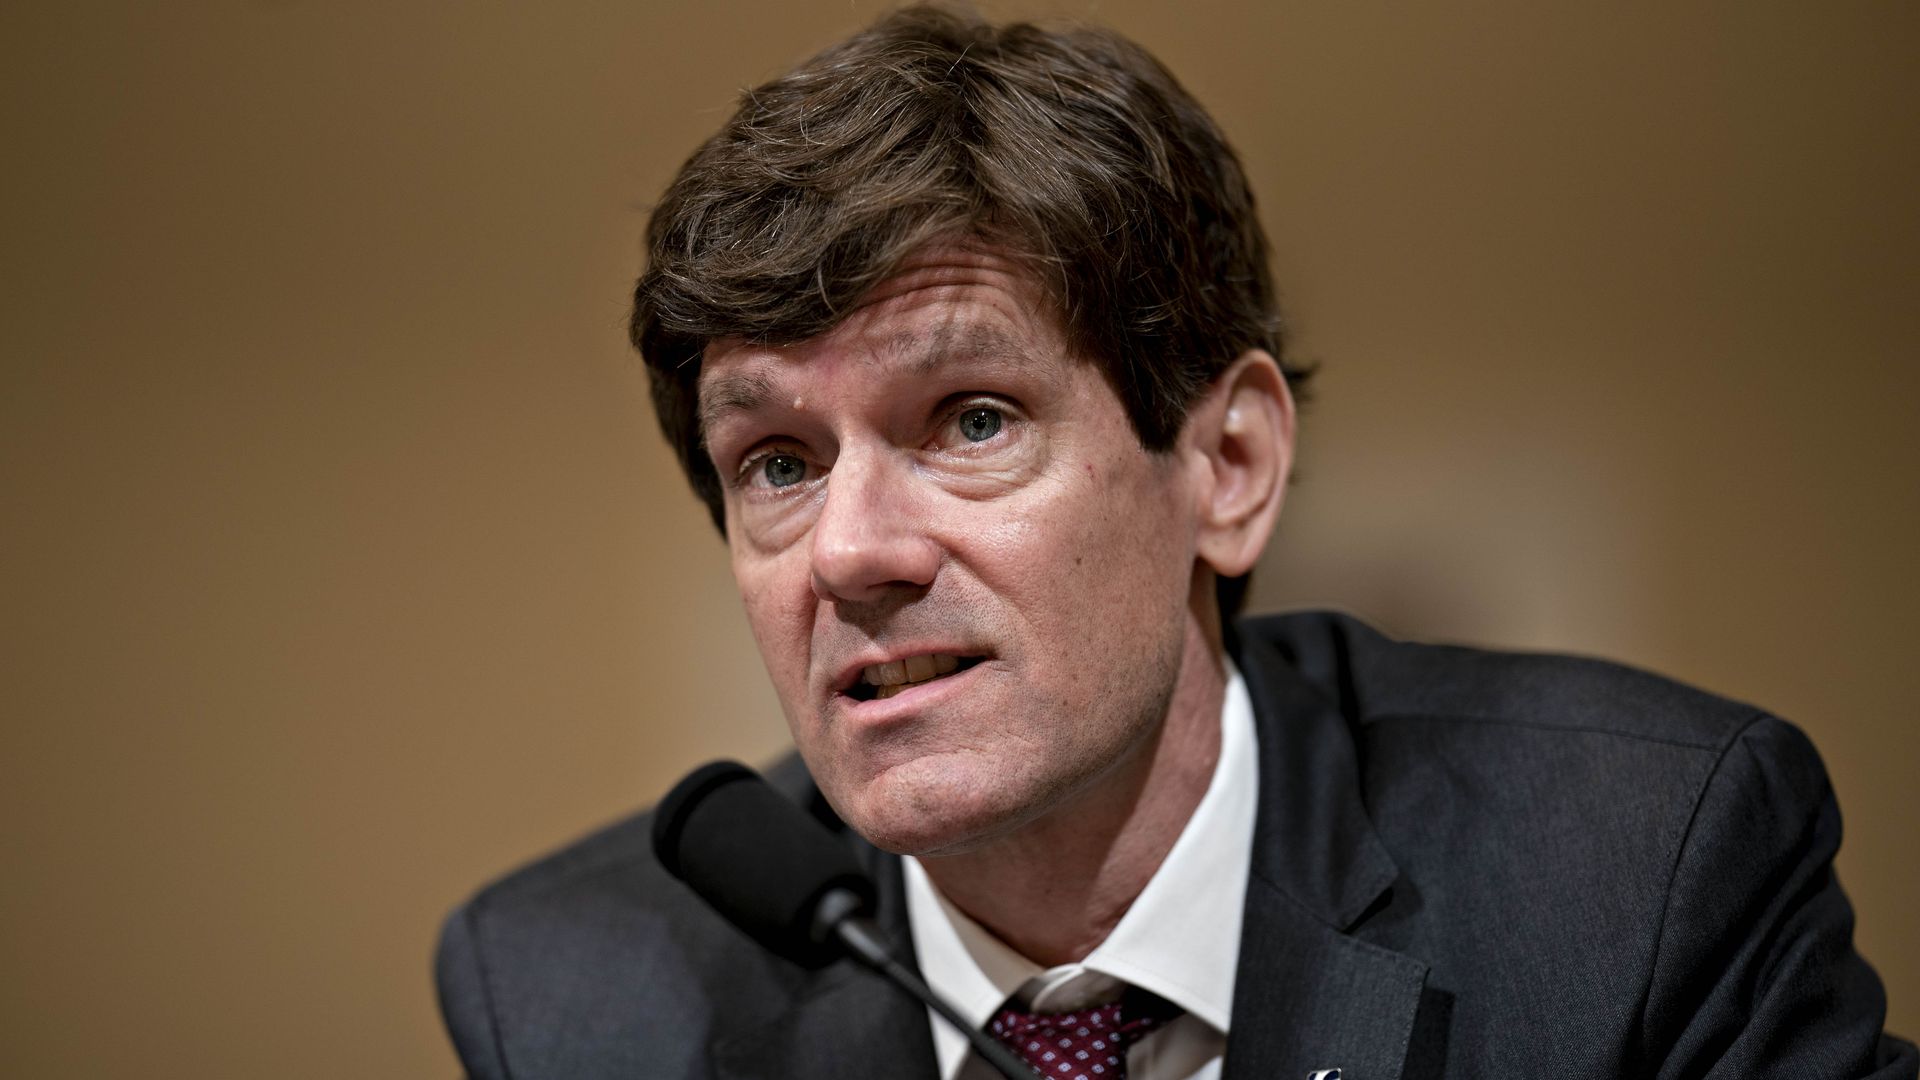 Thomas Dobbs, state health officer with the Mississippi State Department of Health, speaks during a House Homeland Security Subcommittee hearing in Washington, D.C., U.S., on Tuesday, March 10, 2020. 